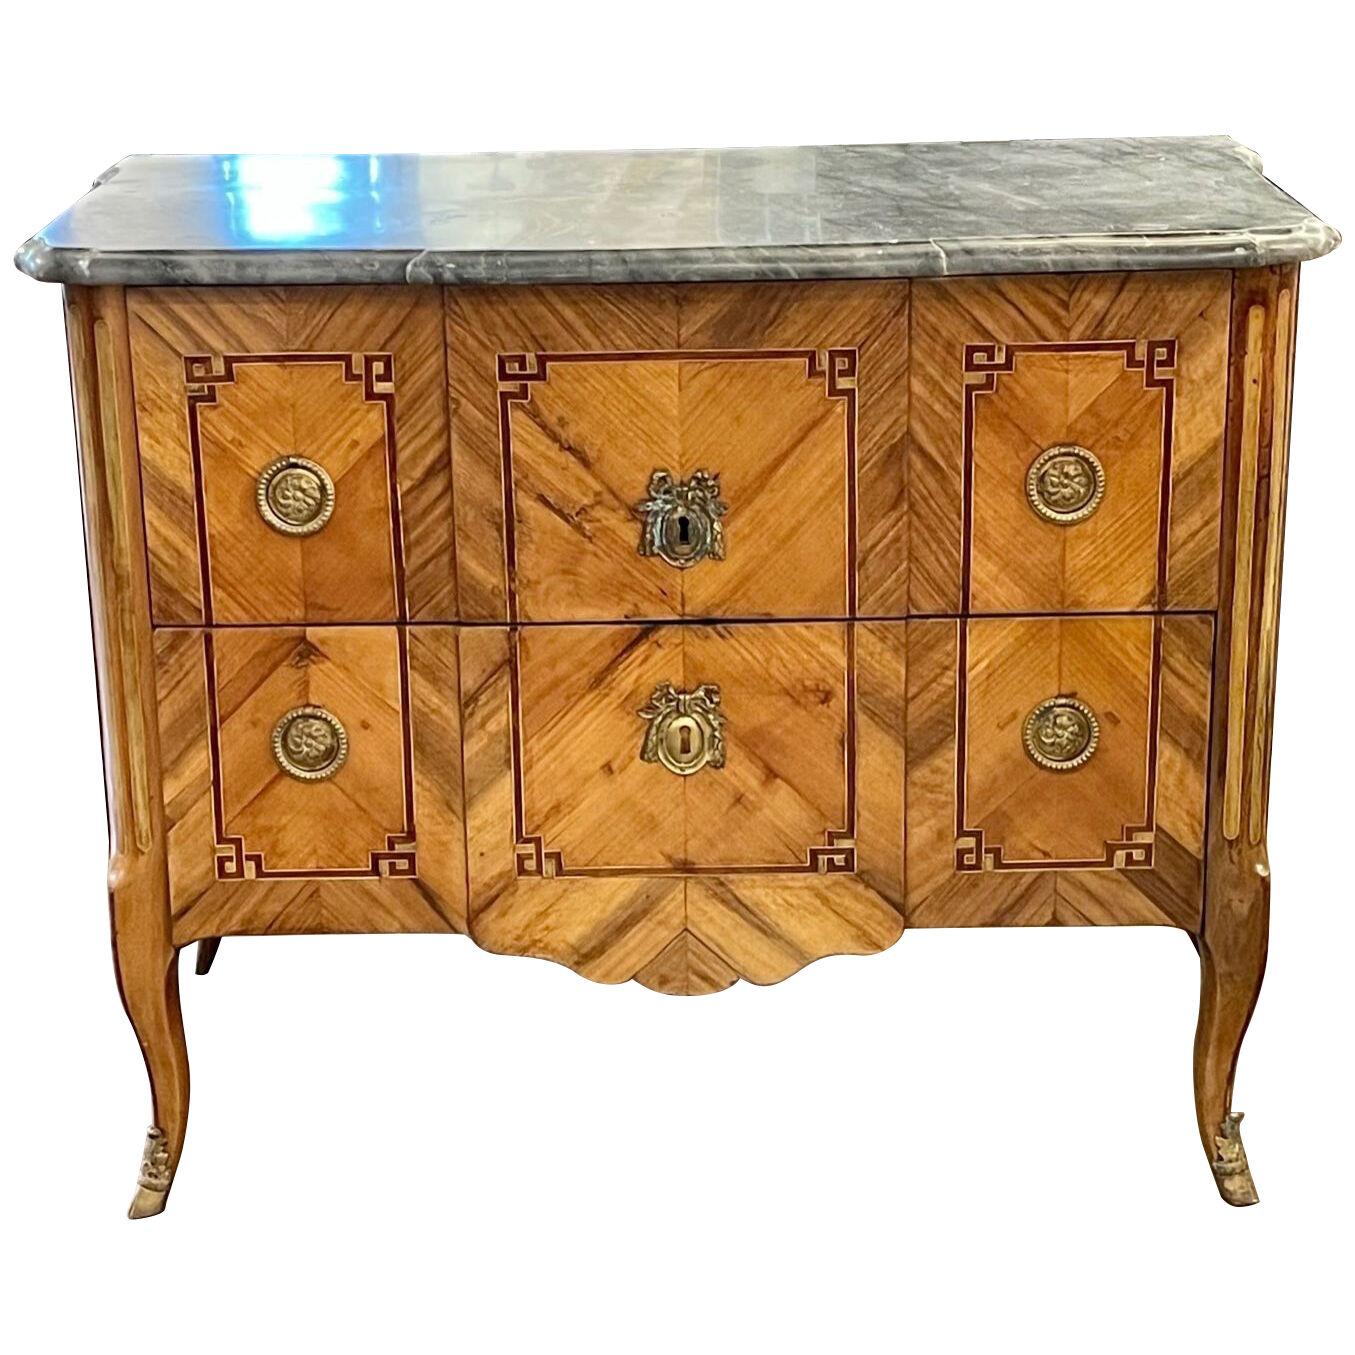 18th Century French Transitional Inlaid Walnut Commode